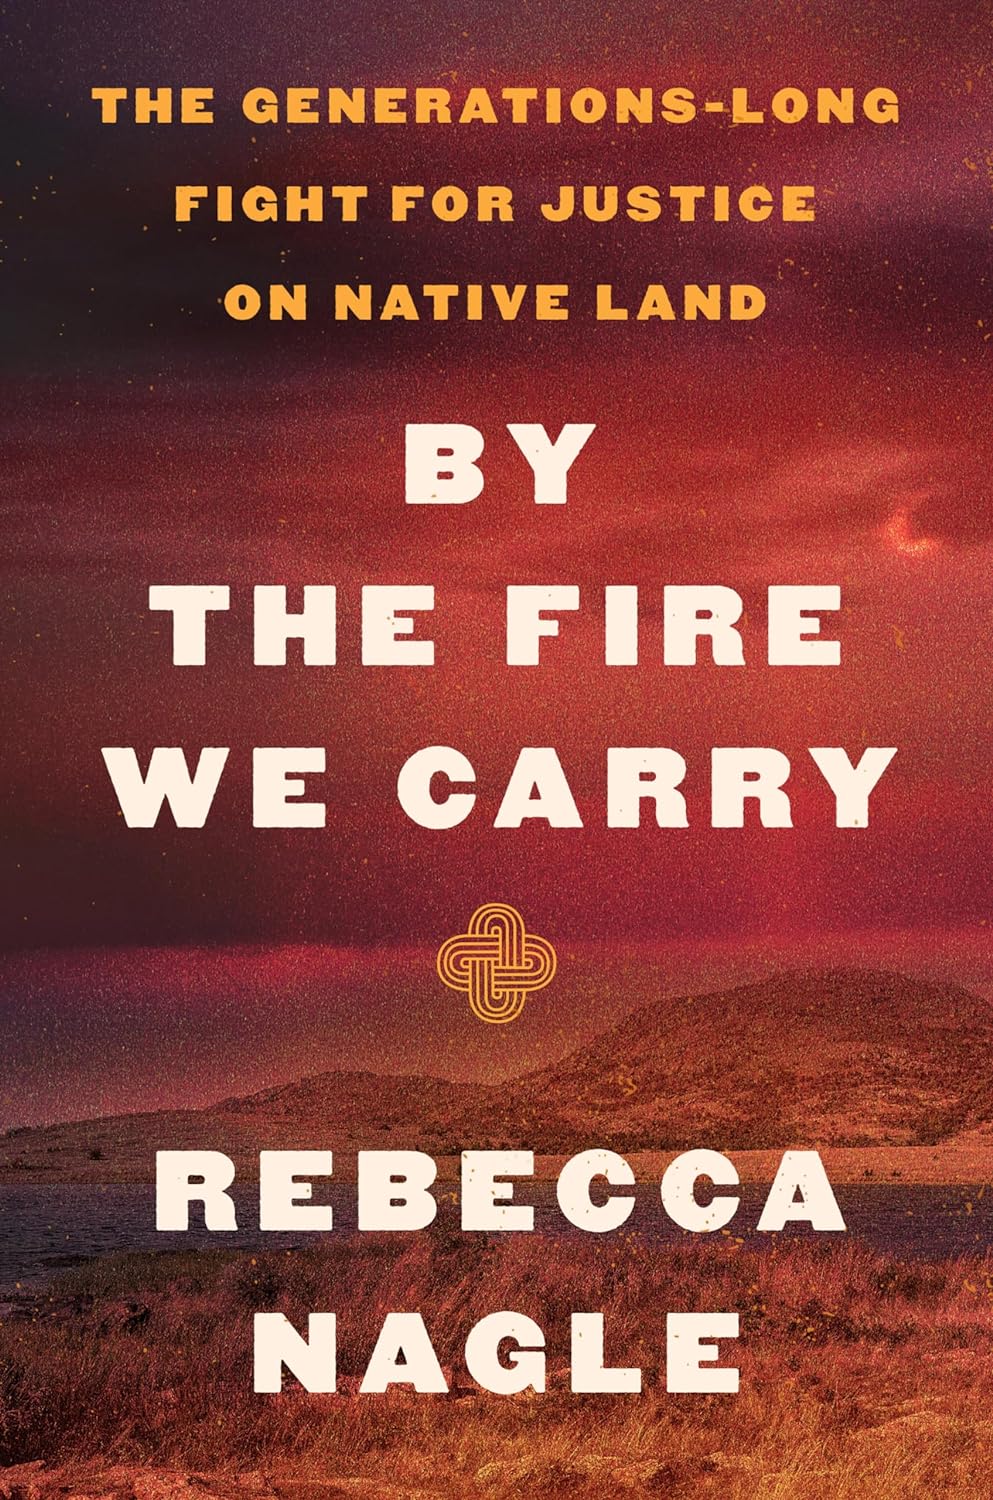 By the Fire We Carry: The Generations-Long Fight for Justice on Native Land by Rebecca Nagle